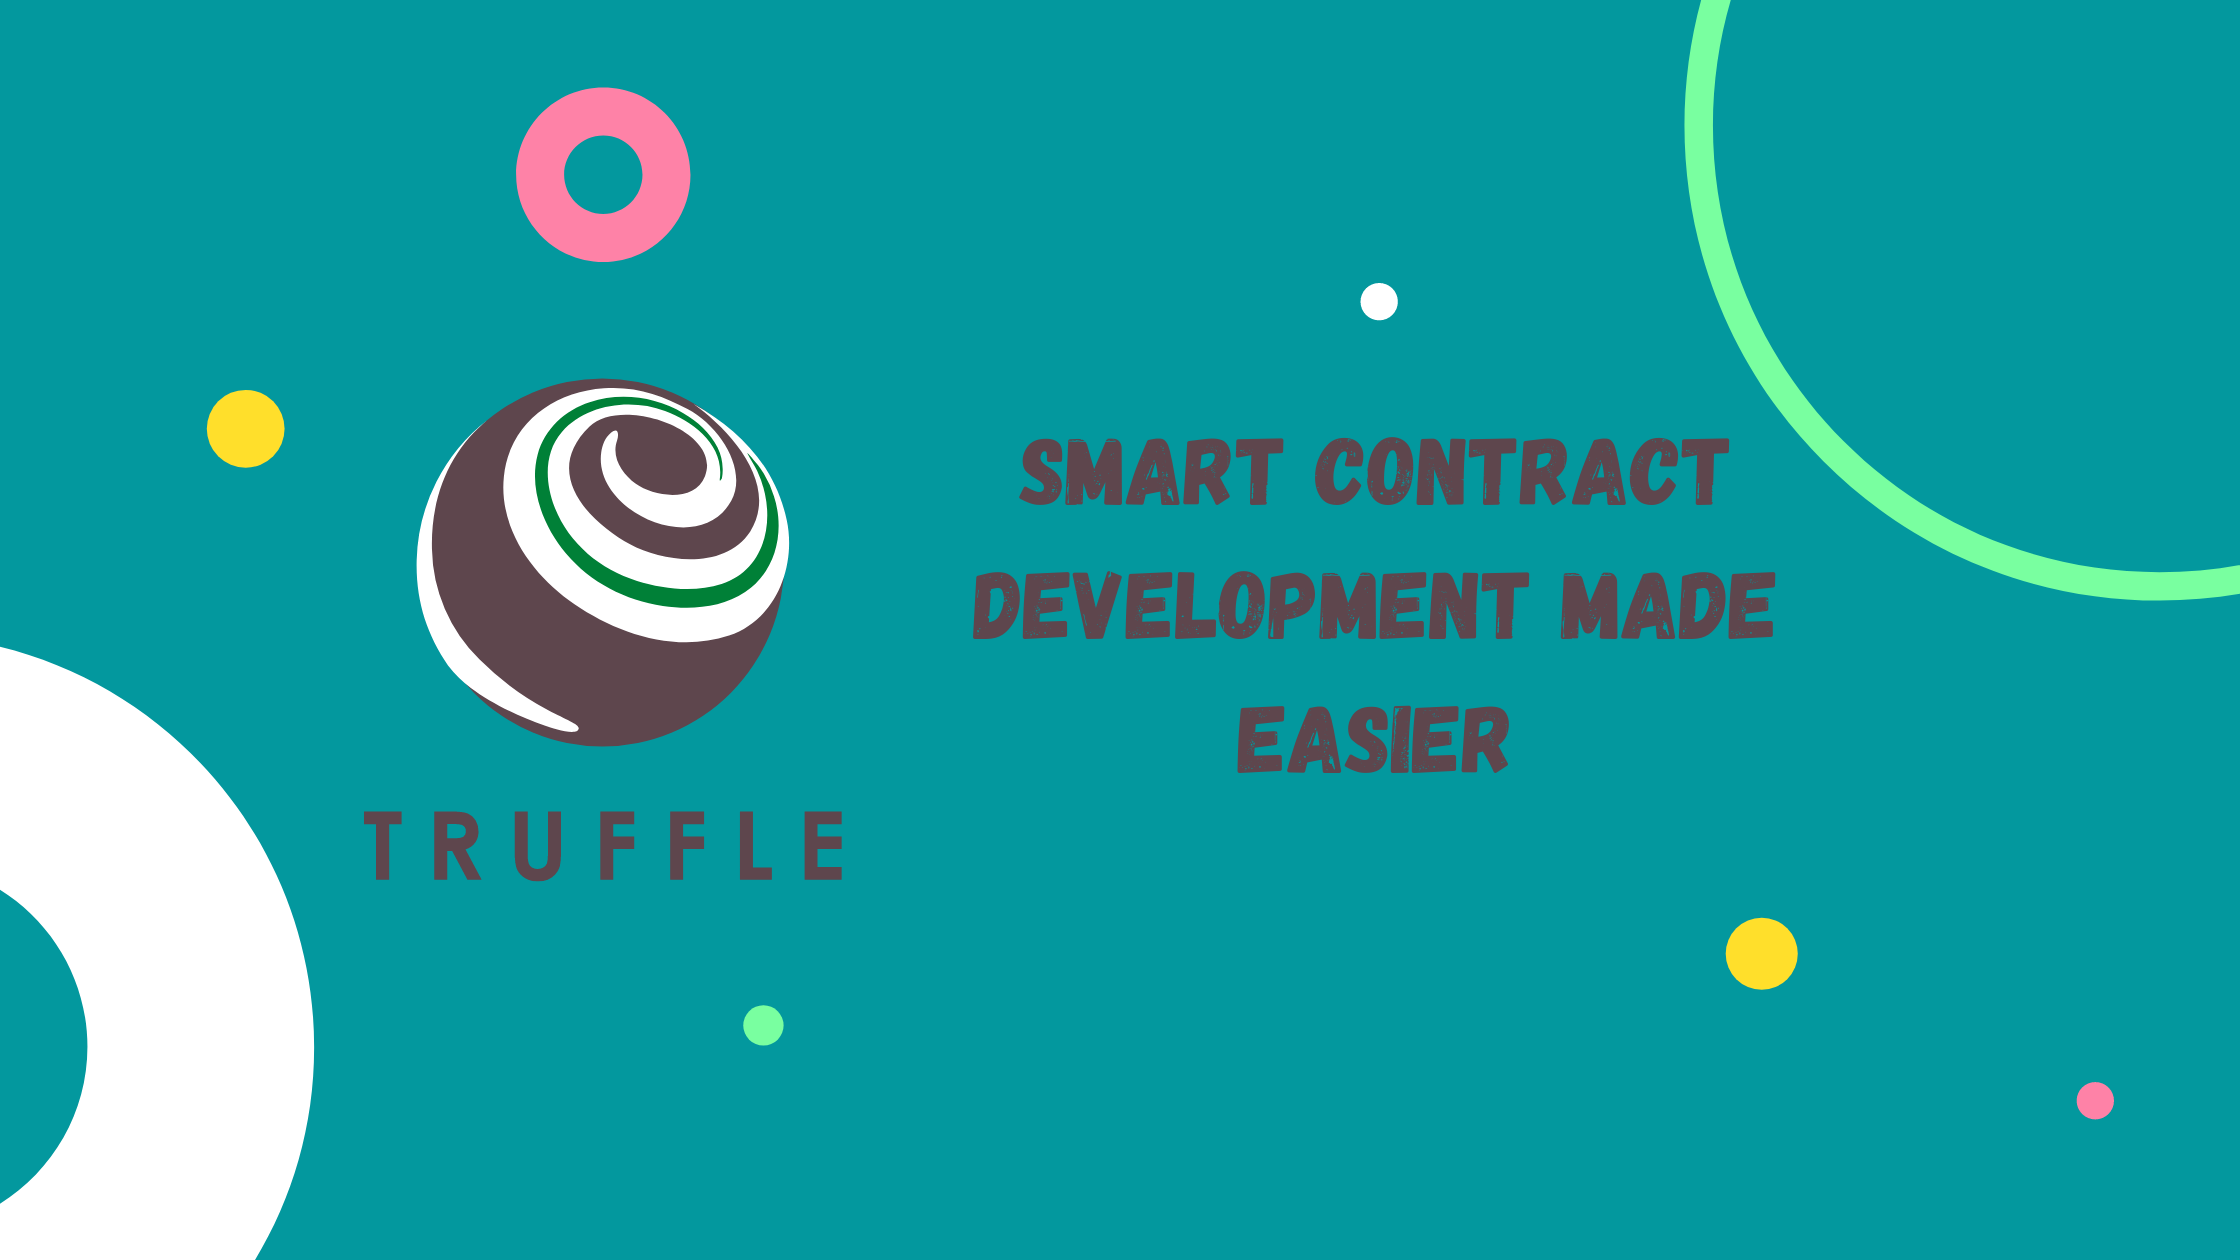 Introduction to Truffle: Sweet tool for smart contract development